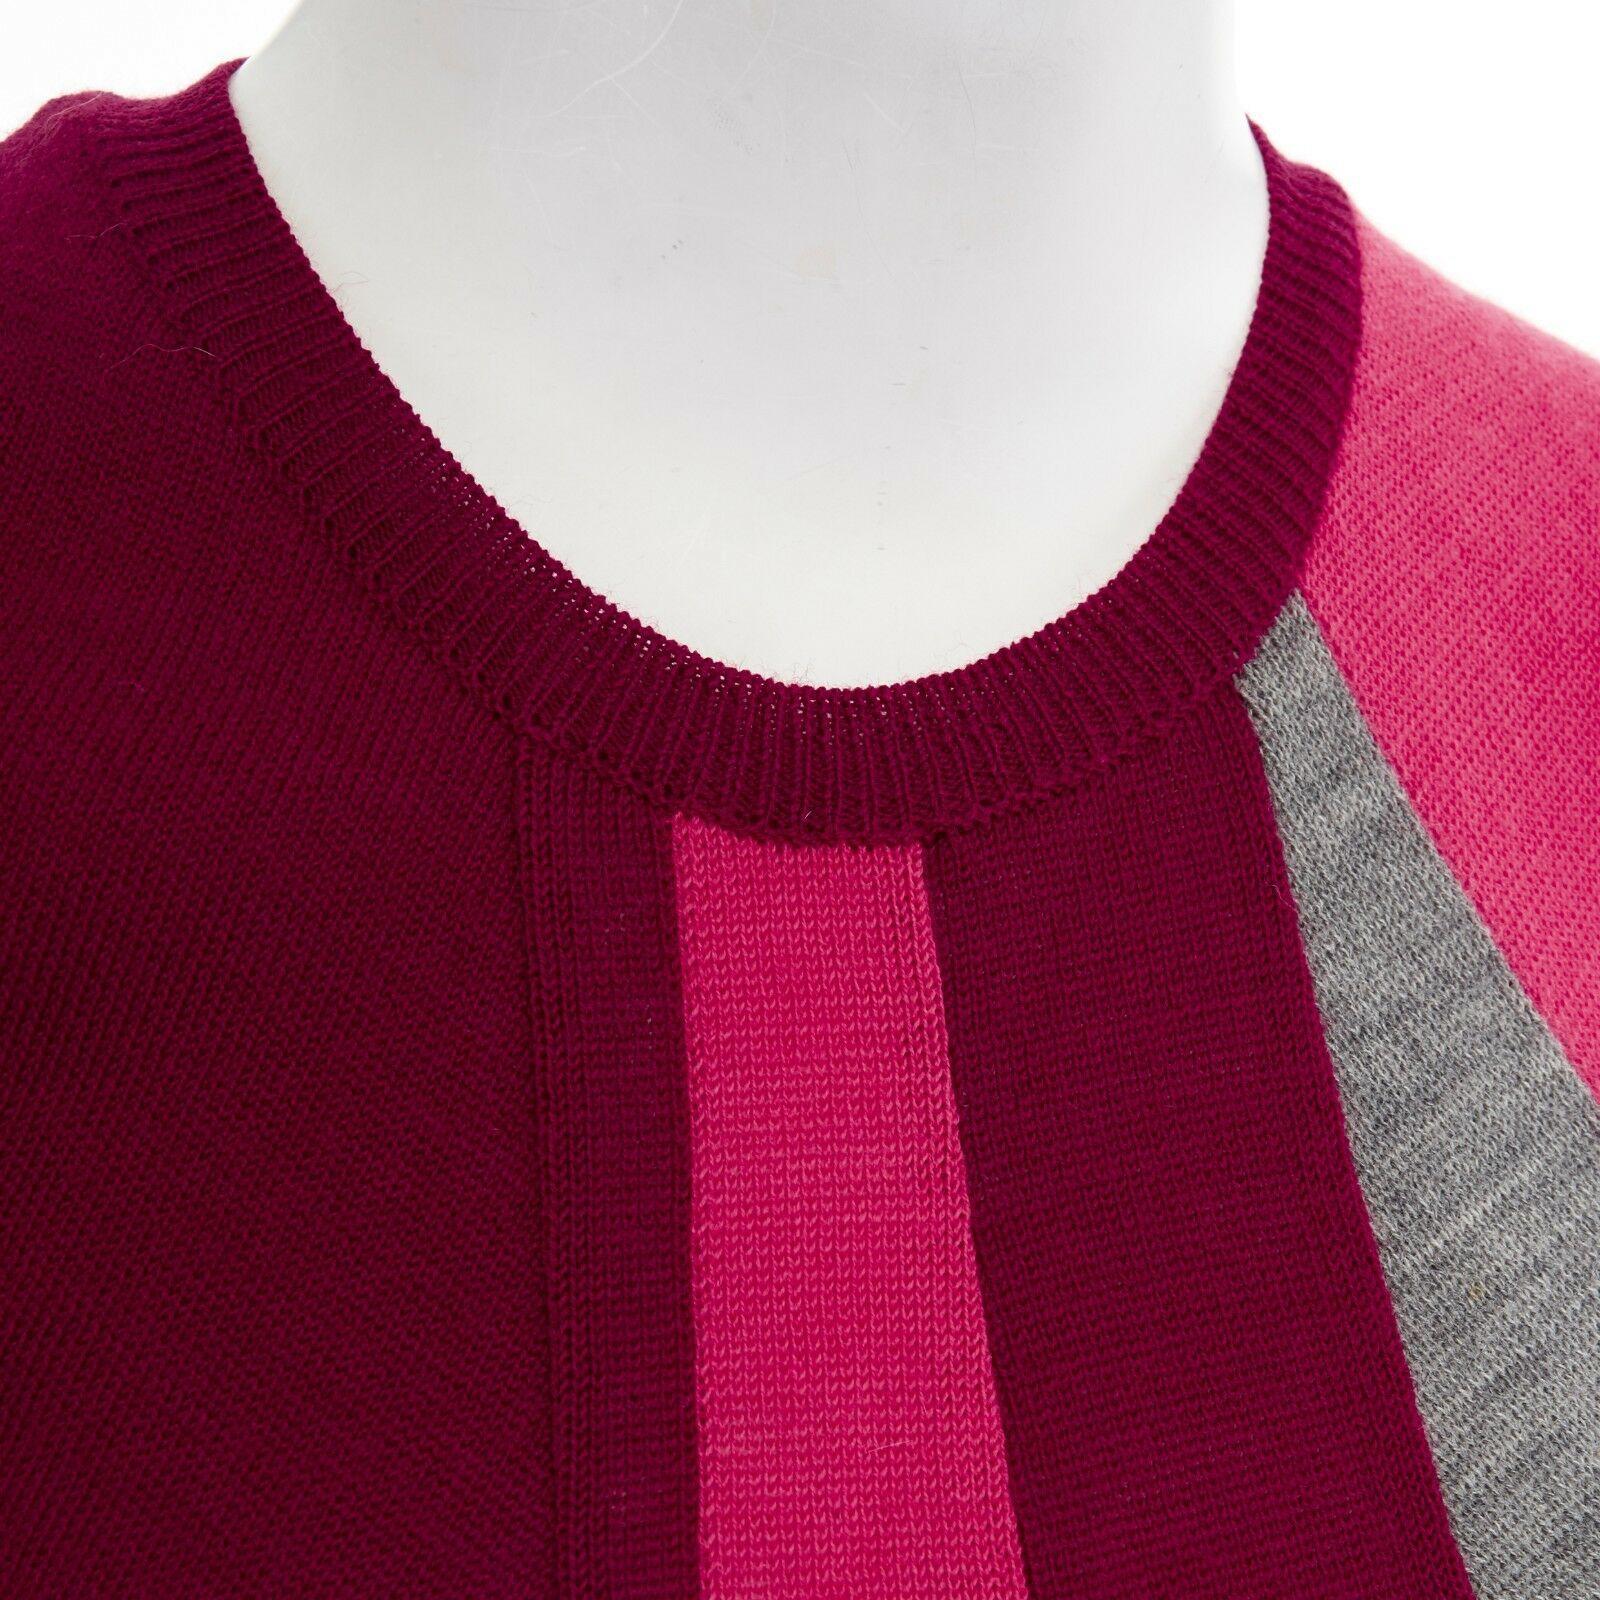 COMME DES GARCONS AD1995 pink maroon grey colorblocked draped knitted vest S 2